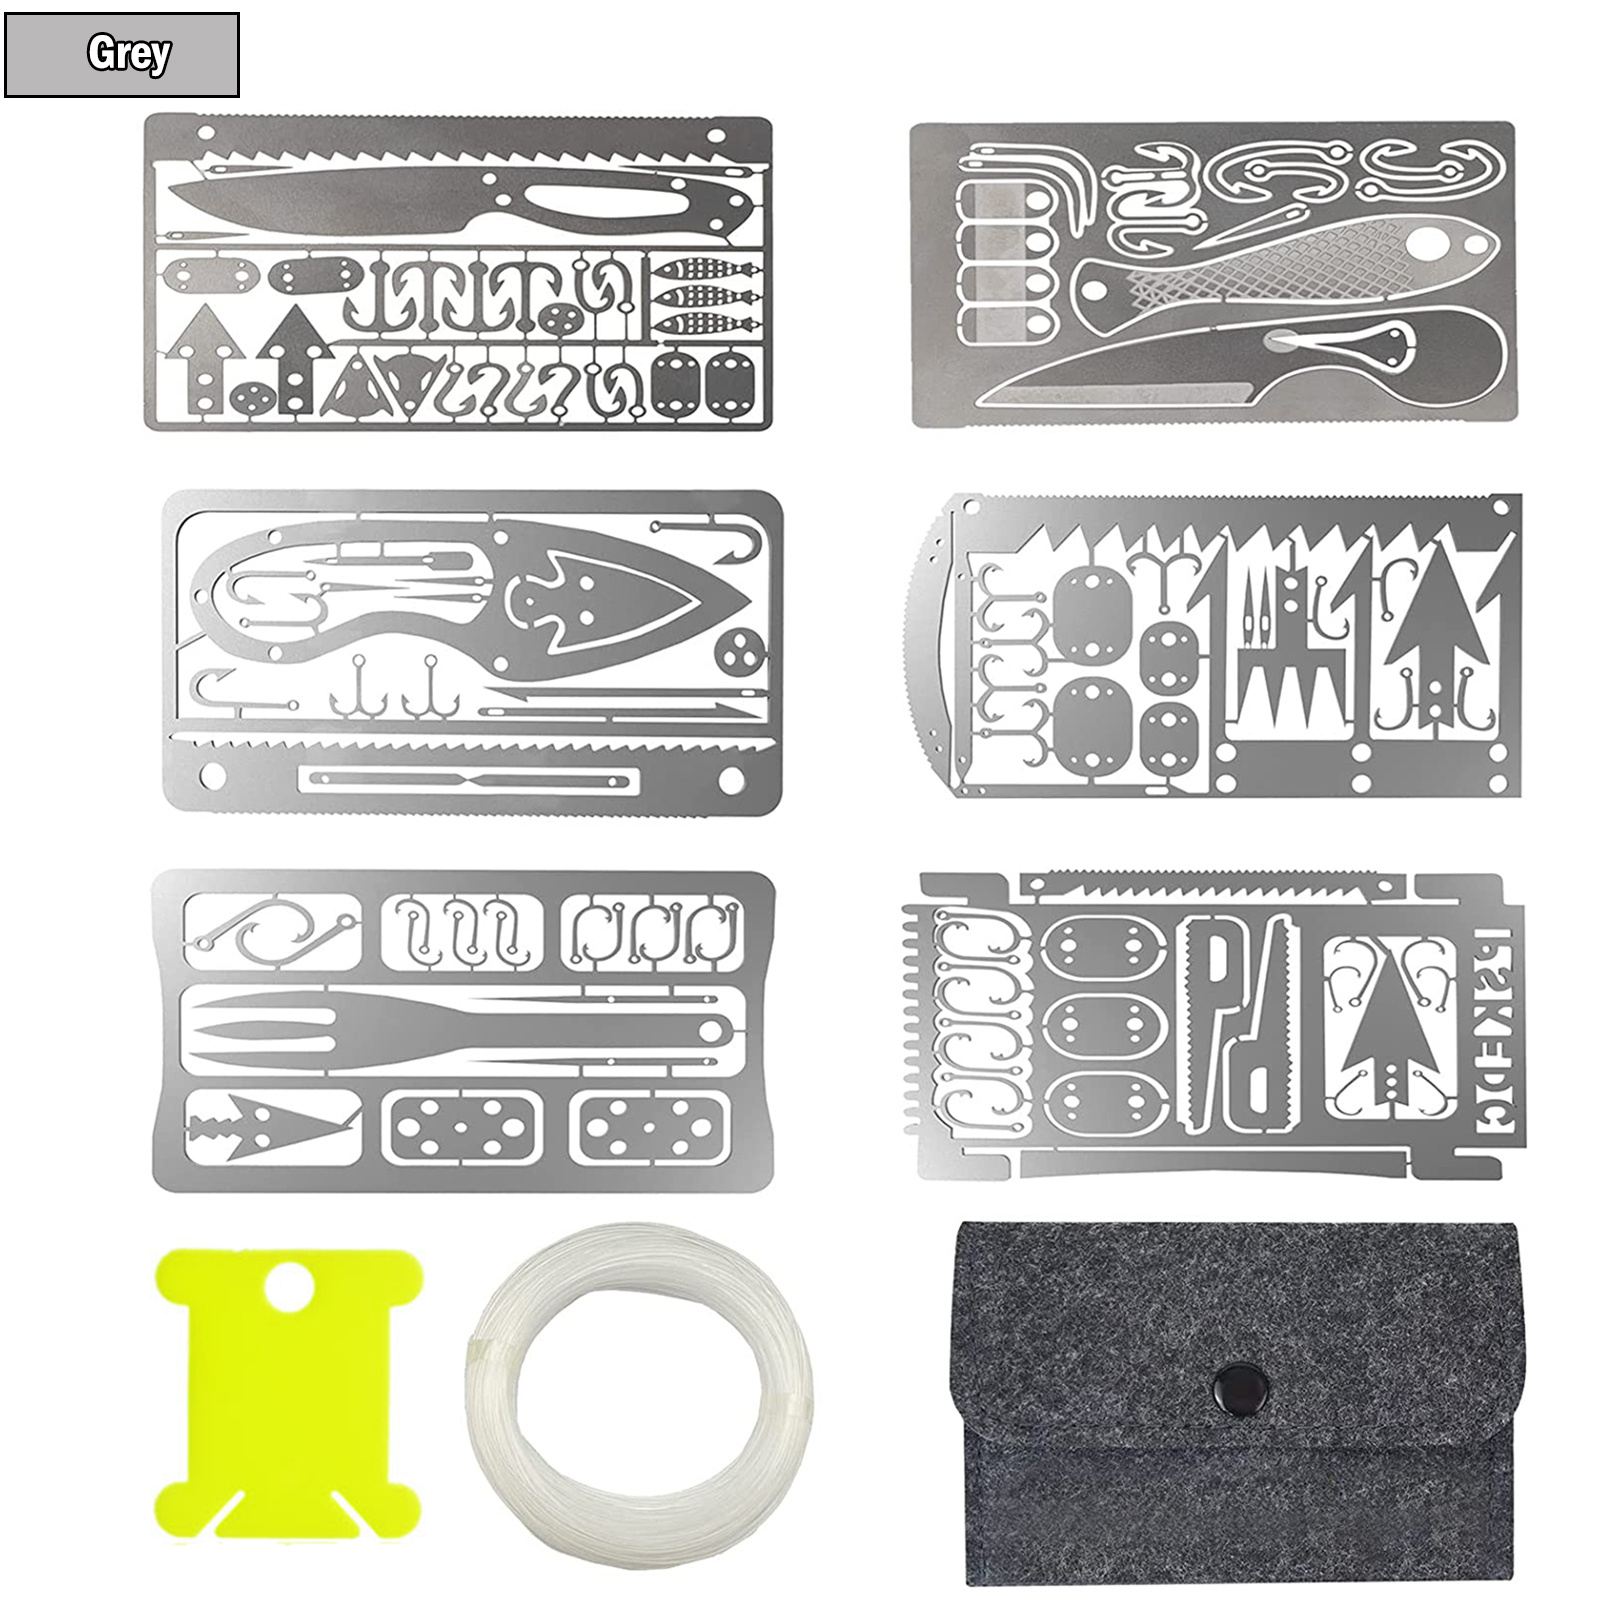 Survival Card Multitool Camping Kit with Fishing Line Gear